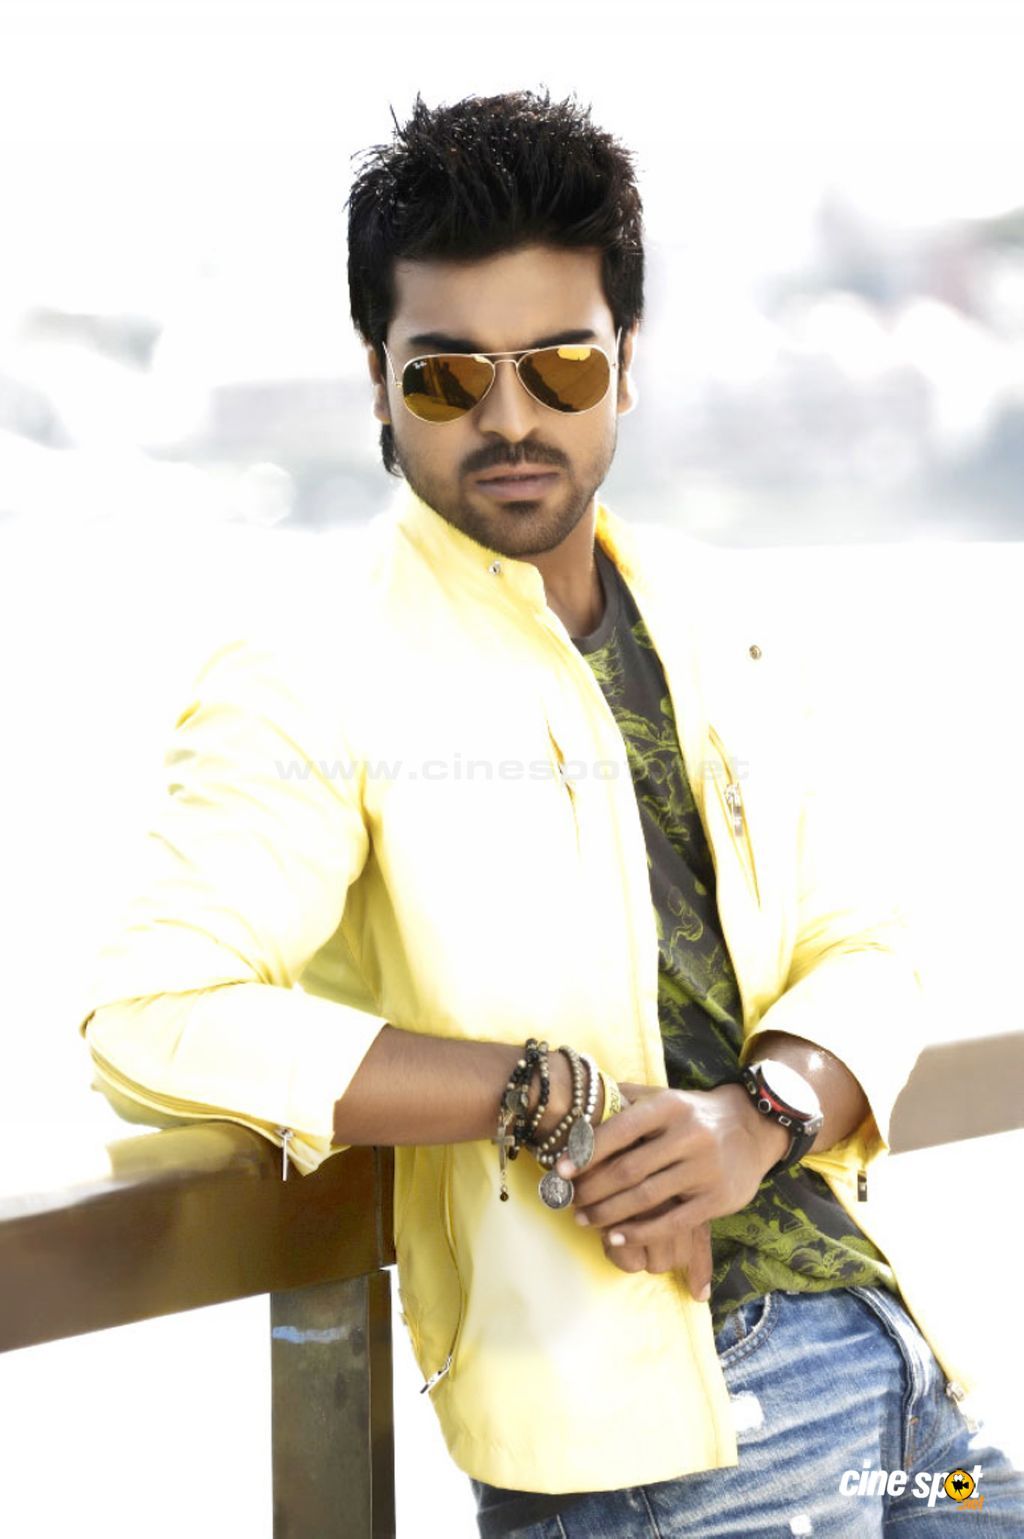 Ram Charan Teja in Orange movie photo (21) Image, Picture, Photo, Icon and Wallpaper: Ravepad place to rave about anything and everything!